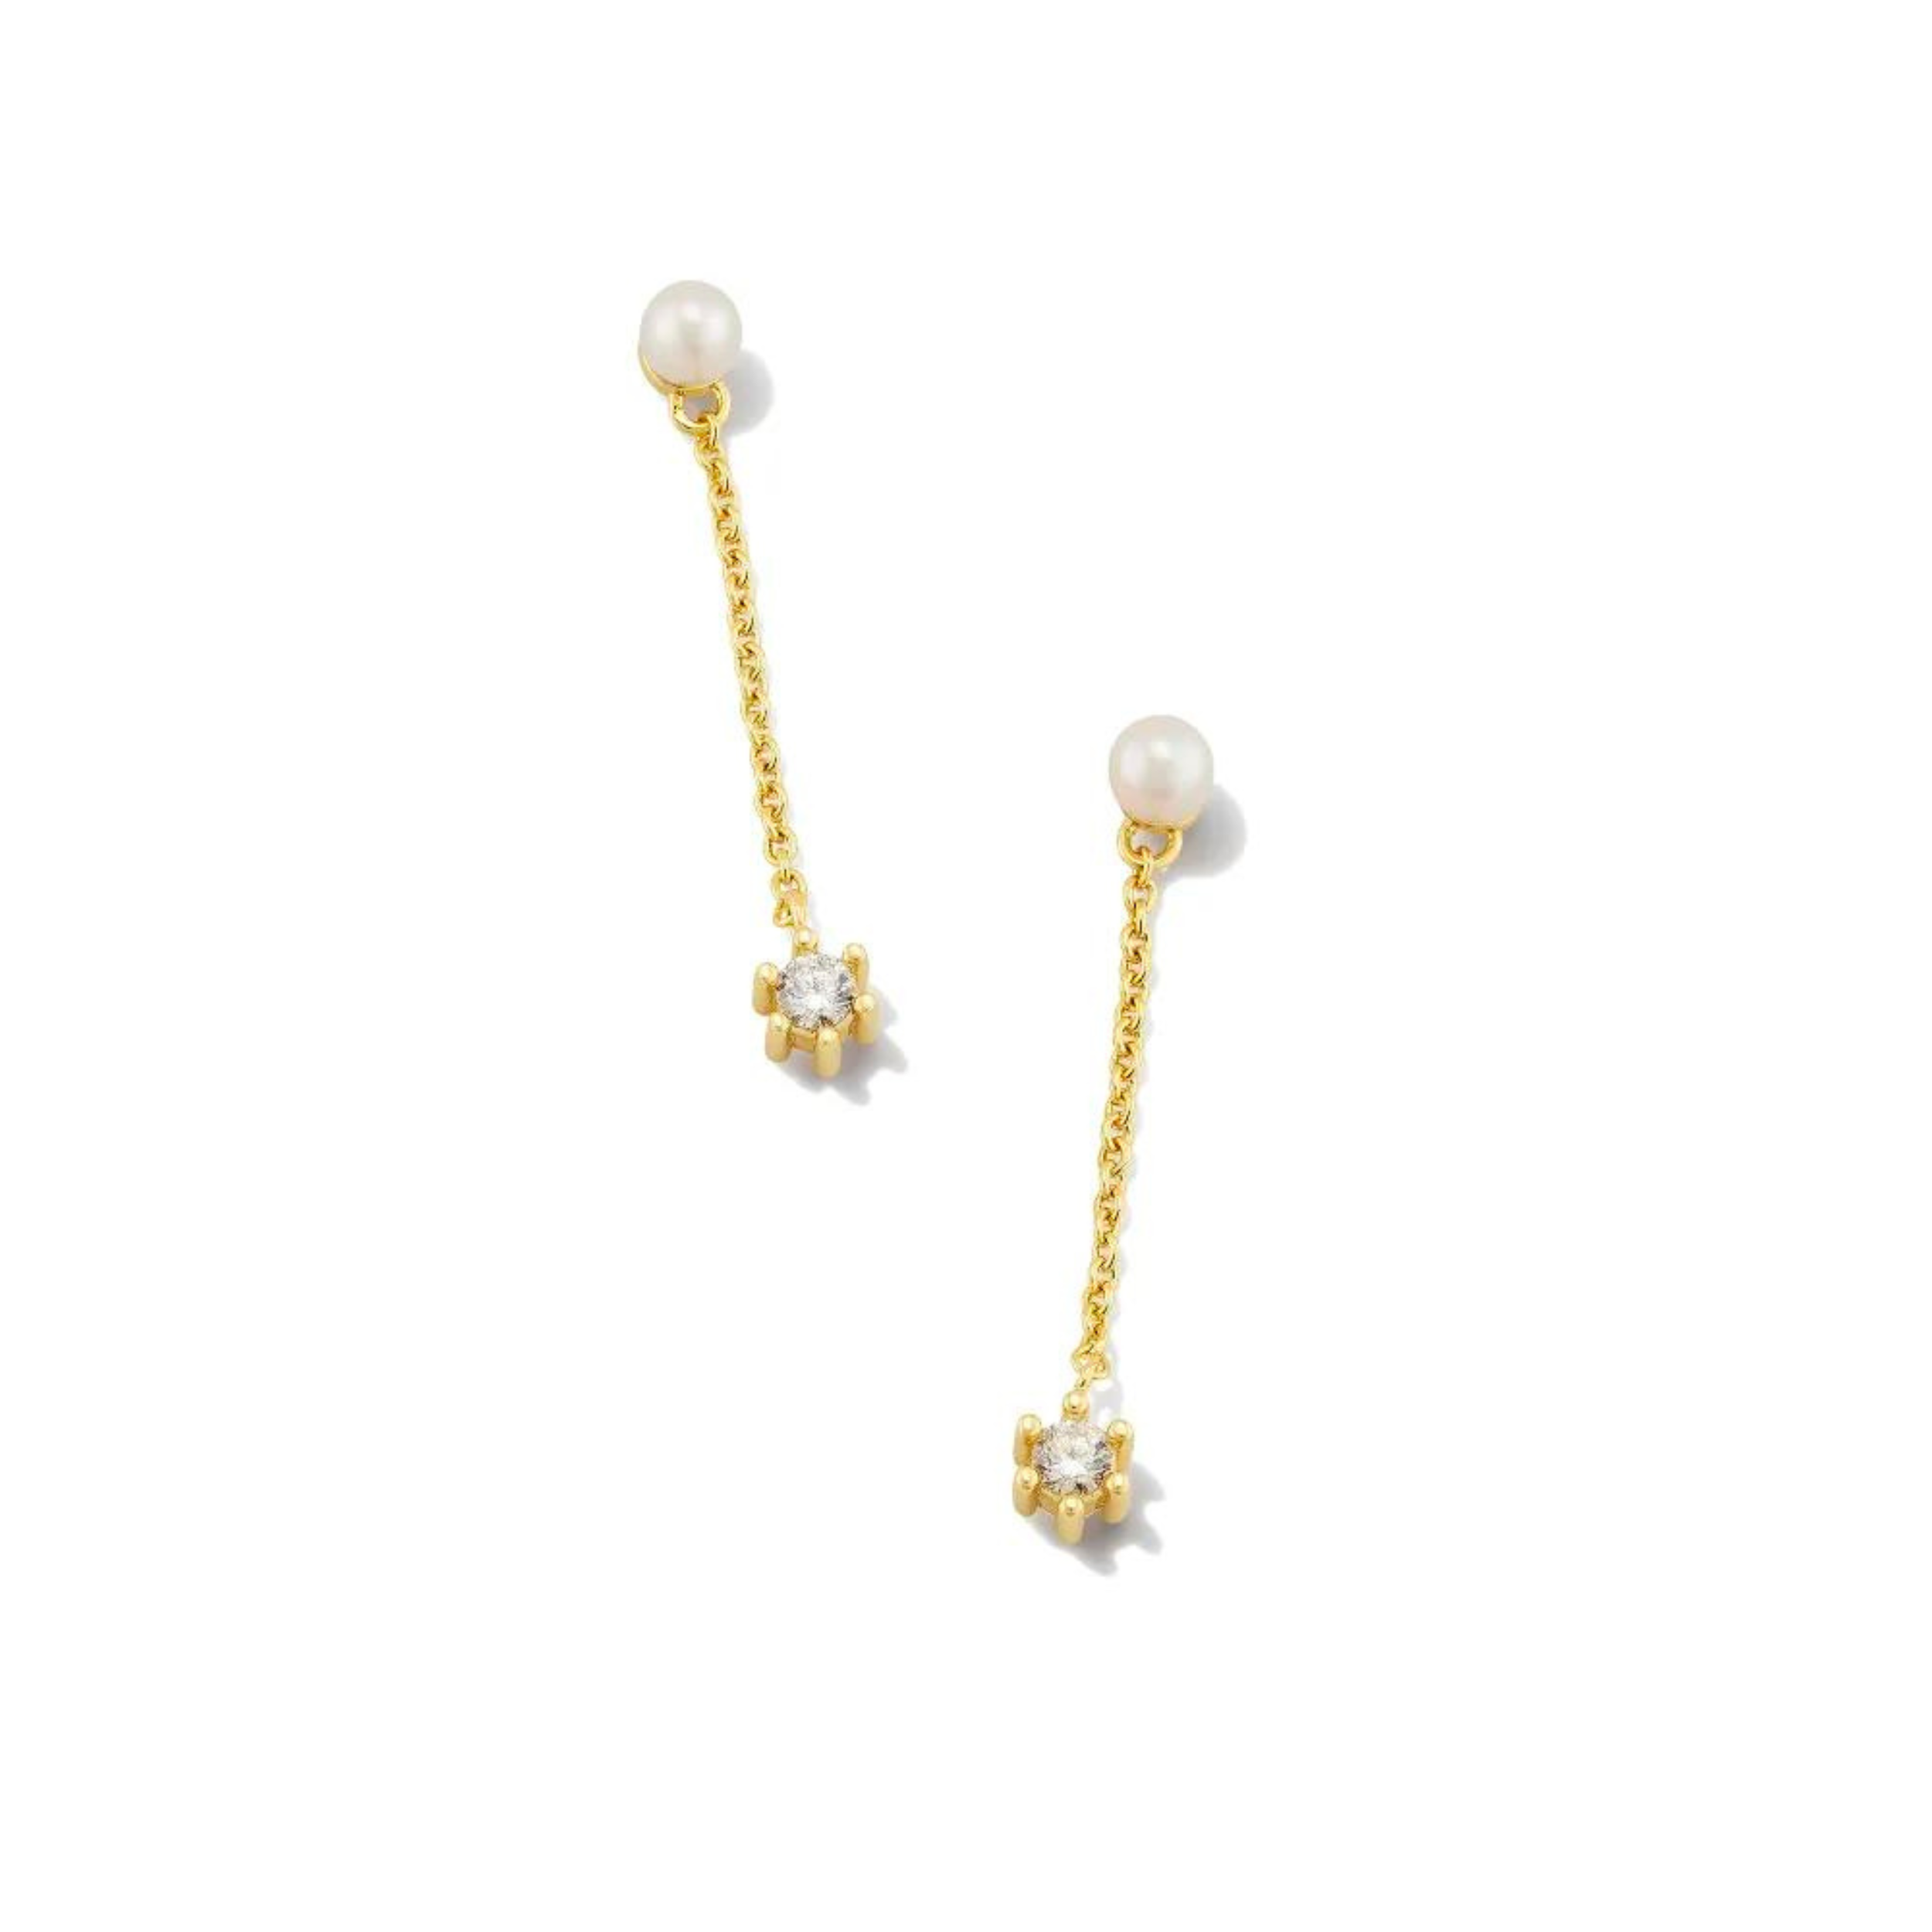 Kendra Scott | Leighton Gold Pearl Linear Earrings in White Pearl - Giddy Up Glamour Boutique